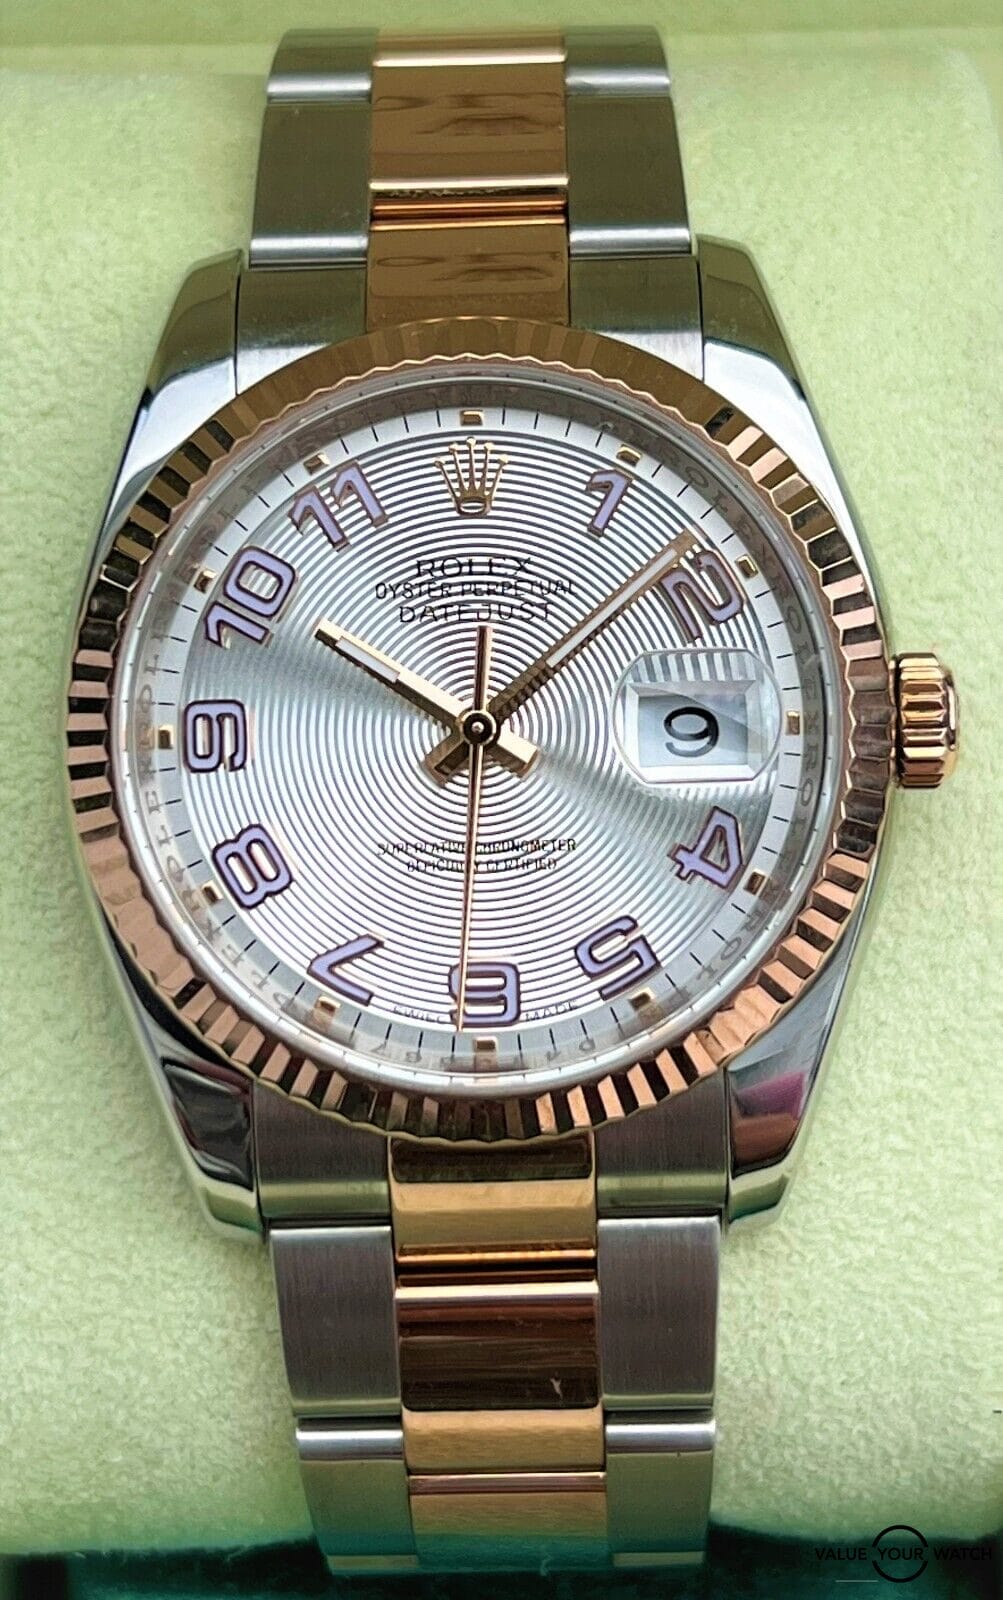 Rolex Datejust 36mm 18K Rose Gold & Stainless Steel 116231